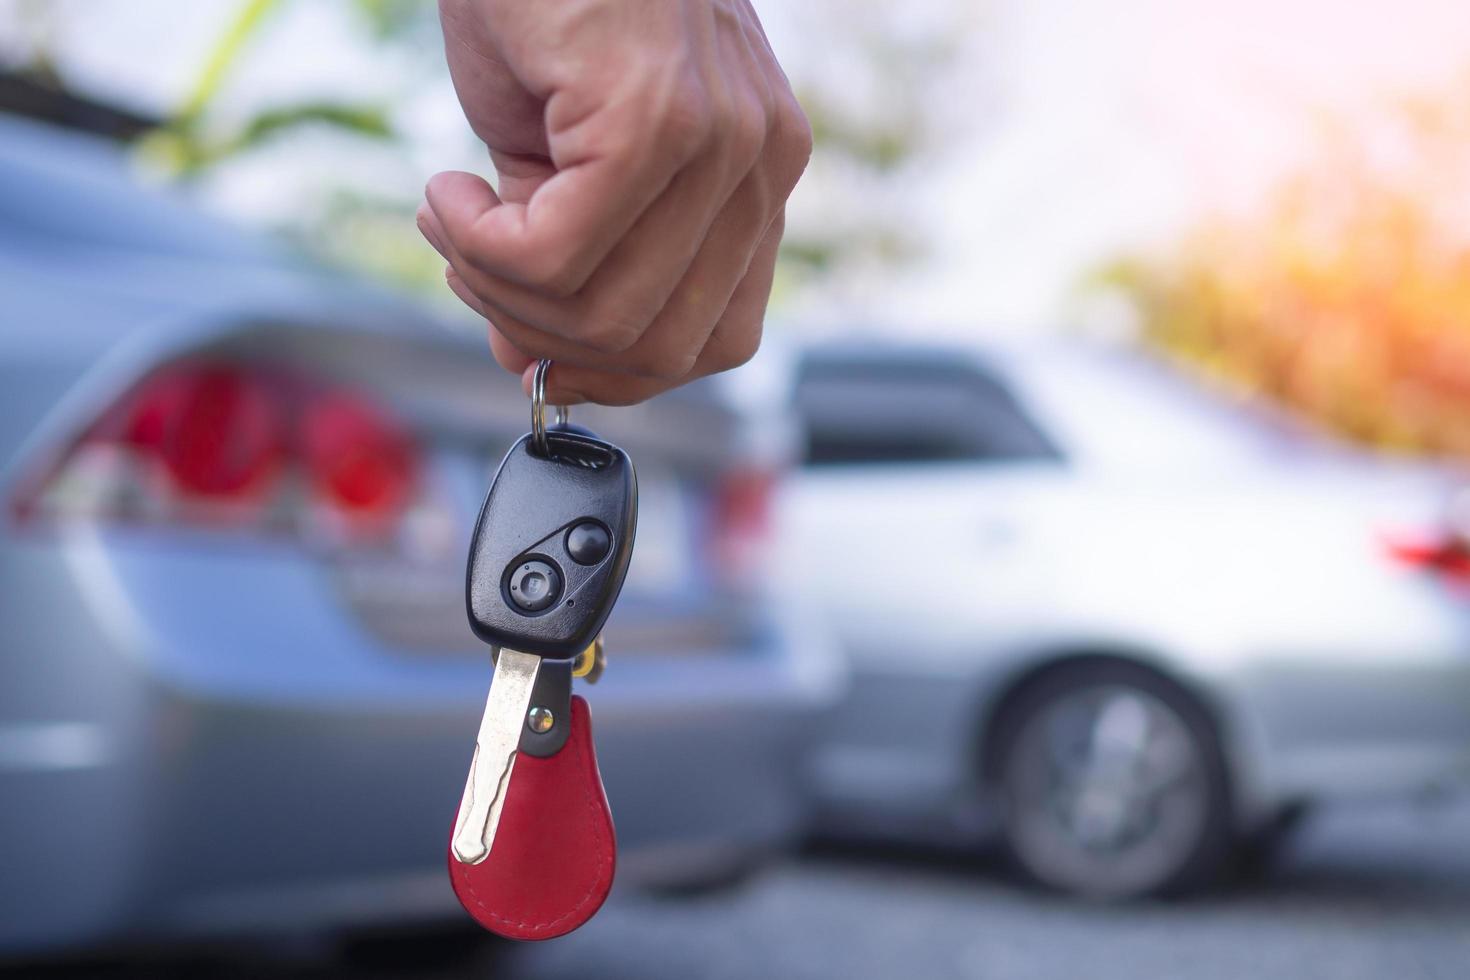 The car salesman and the key to the new owner. photo